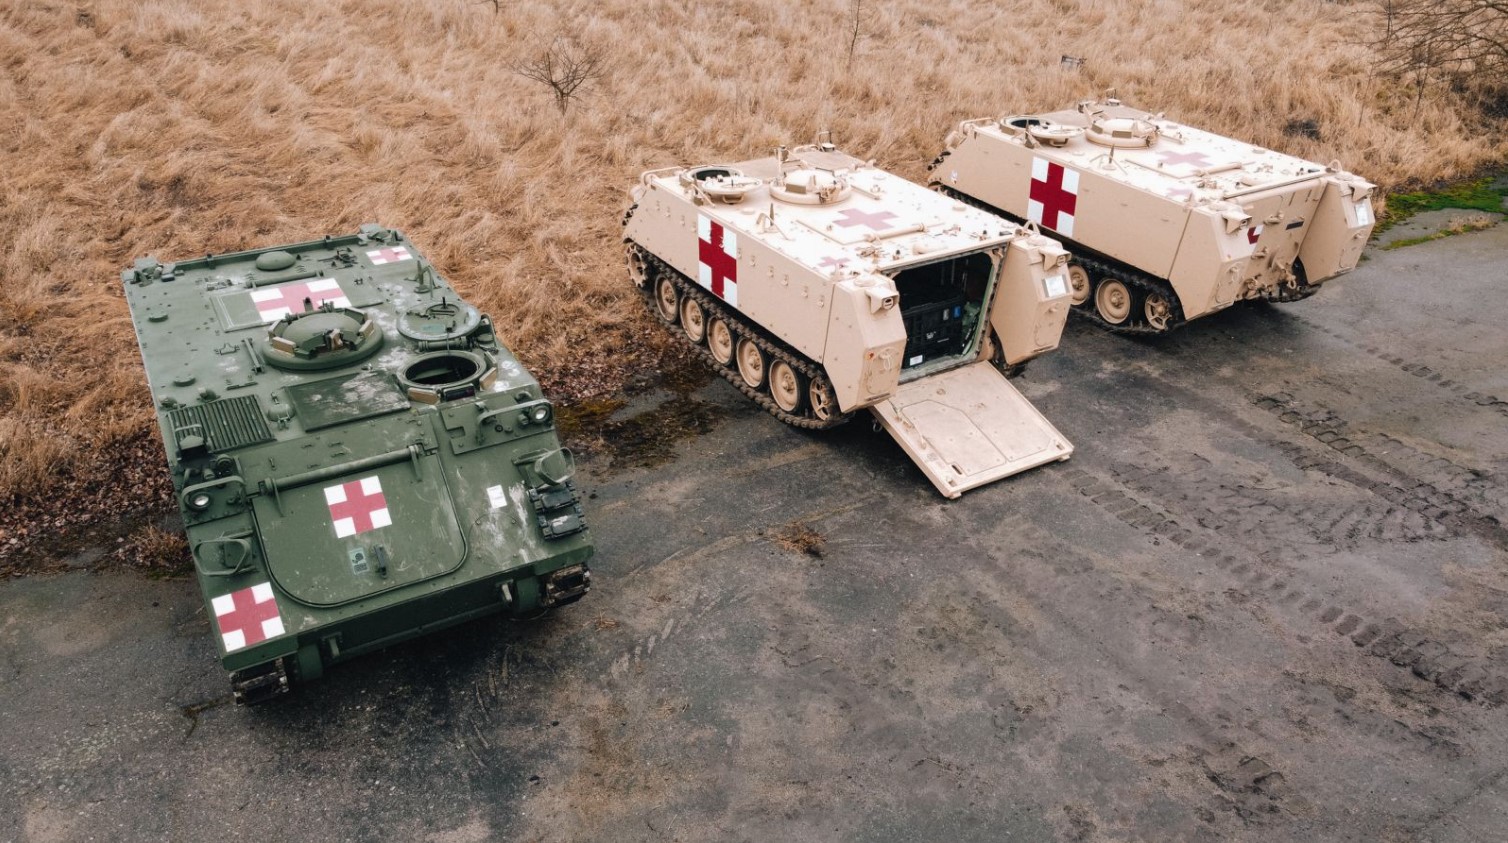 Ukraine receives M113 armored personnel carriers for battlefield medical evacuation